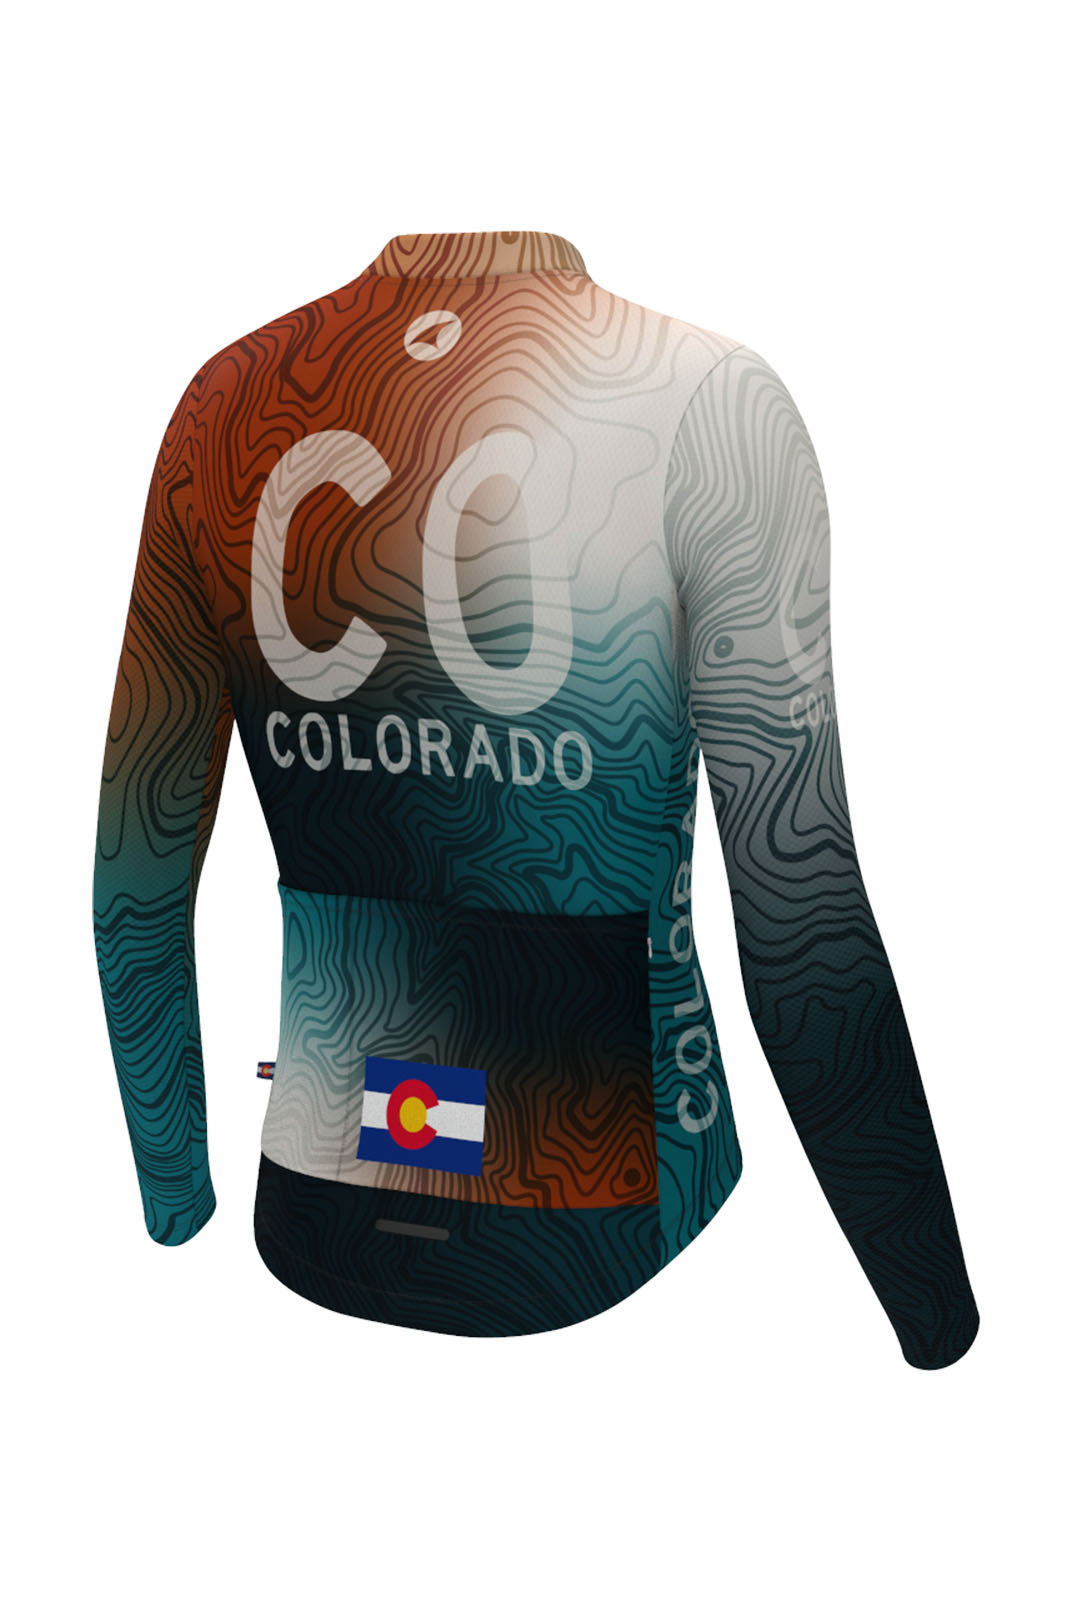 Men's Colorado Geo Long Sleeve Cycling Jersey - Ascent Aero Back View